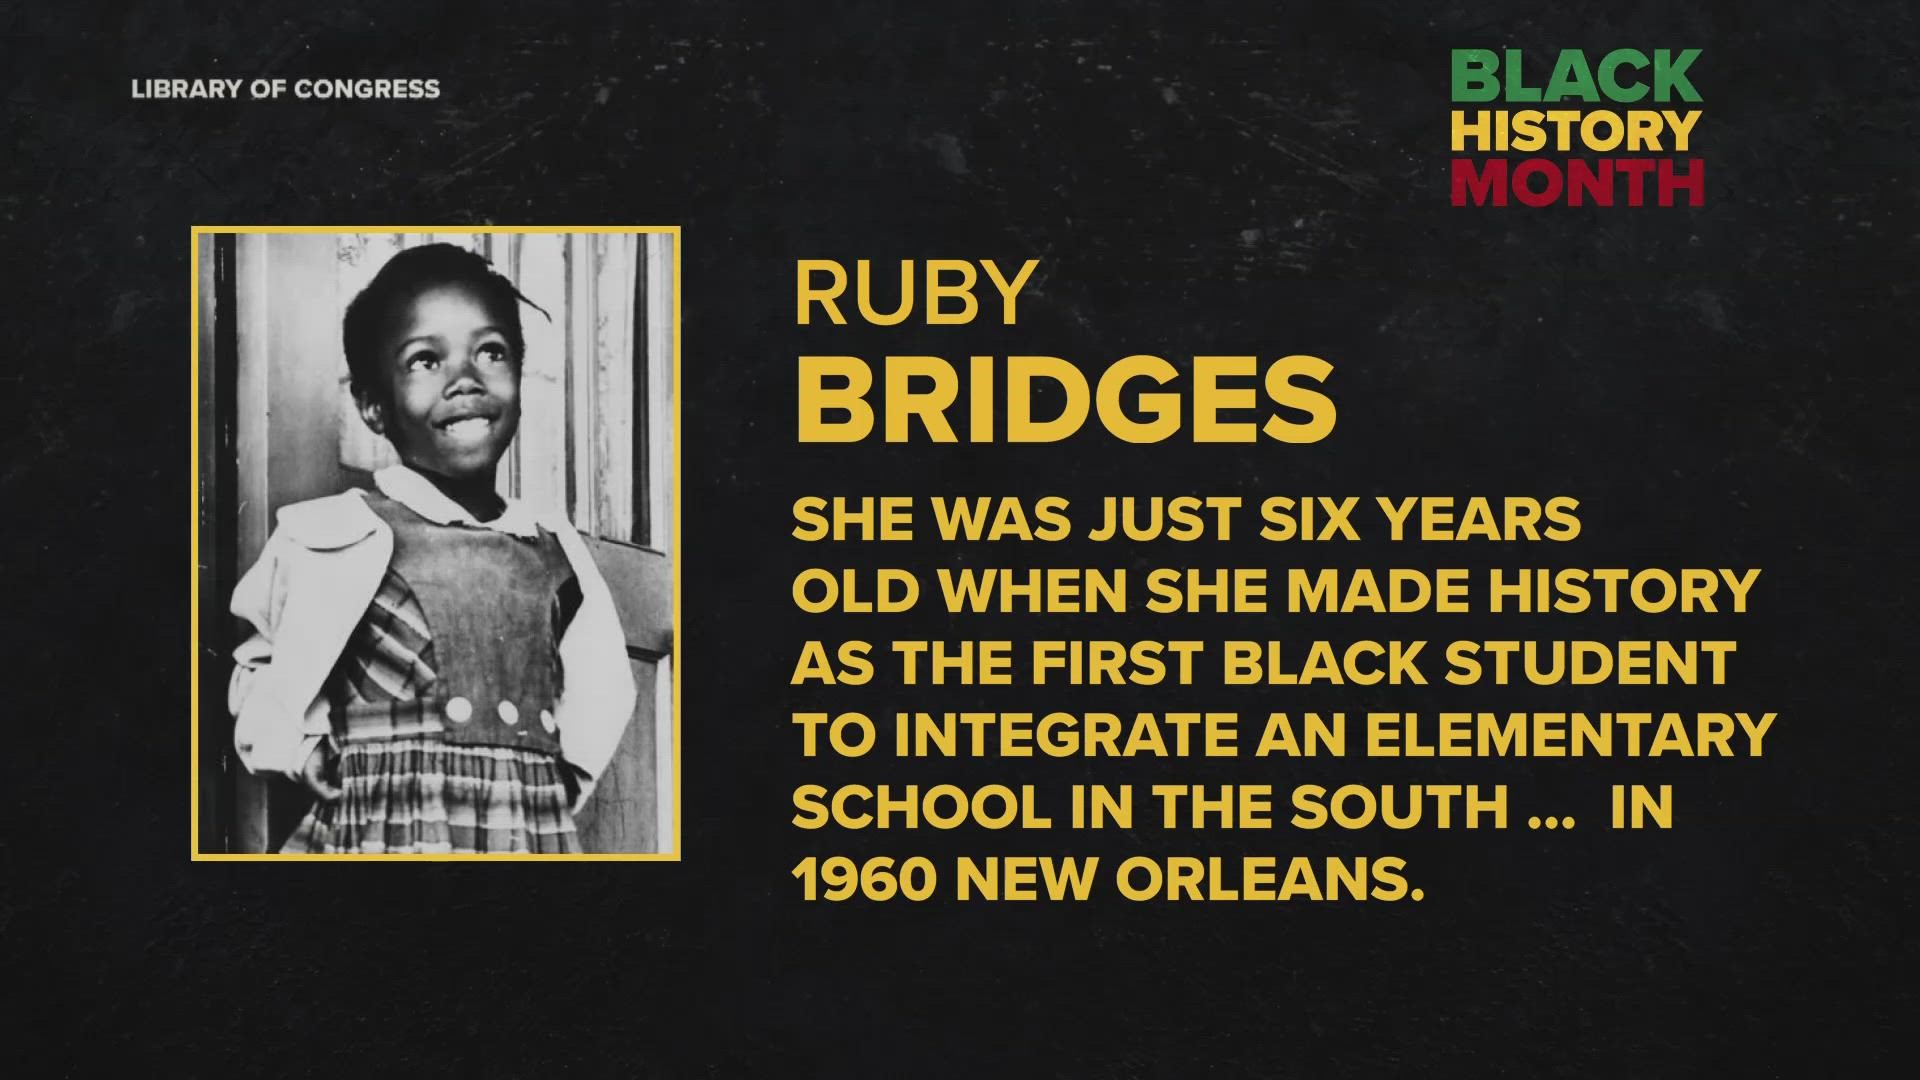 Ruby Bridges was just 6 years old when she made history as the first Black student to integrate an elementary school in the south. This was in 1960 in New Orleans.